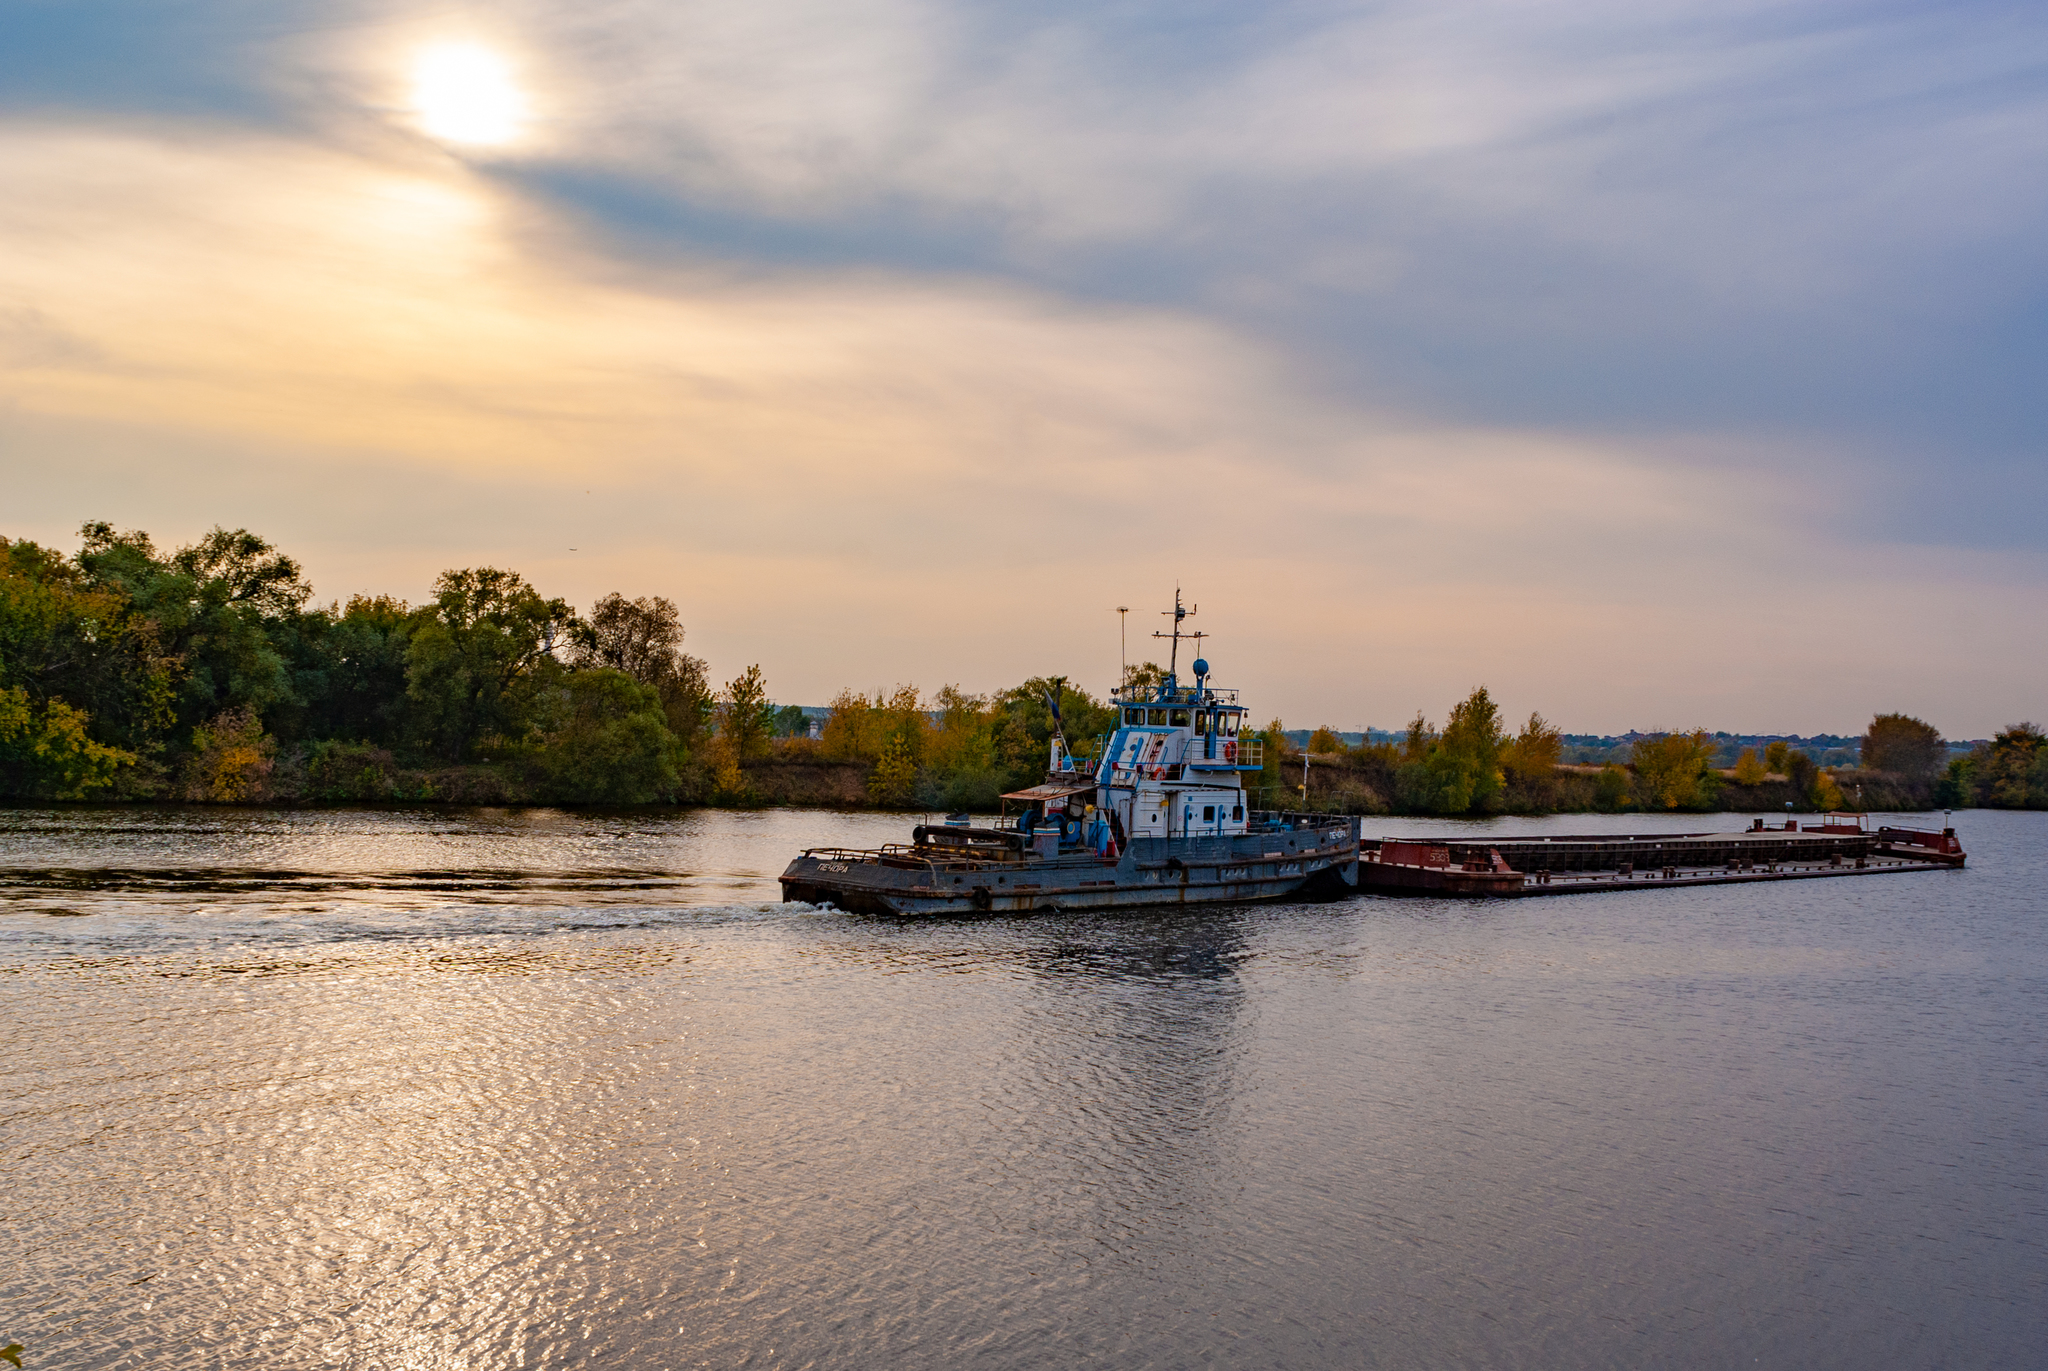 Sunset on the river - My, The photo, Vessel, Barge, River, Lytkarino, Sunset